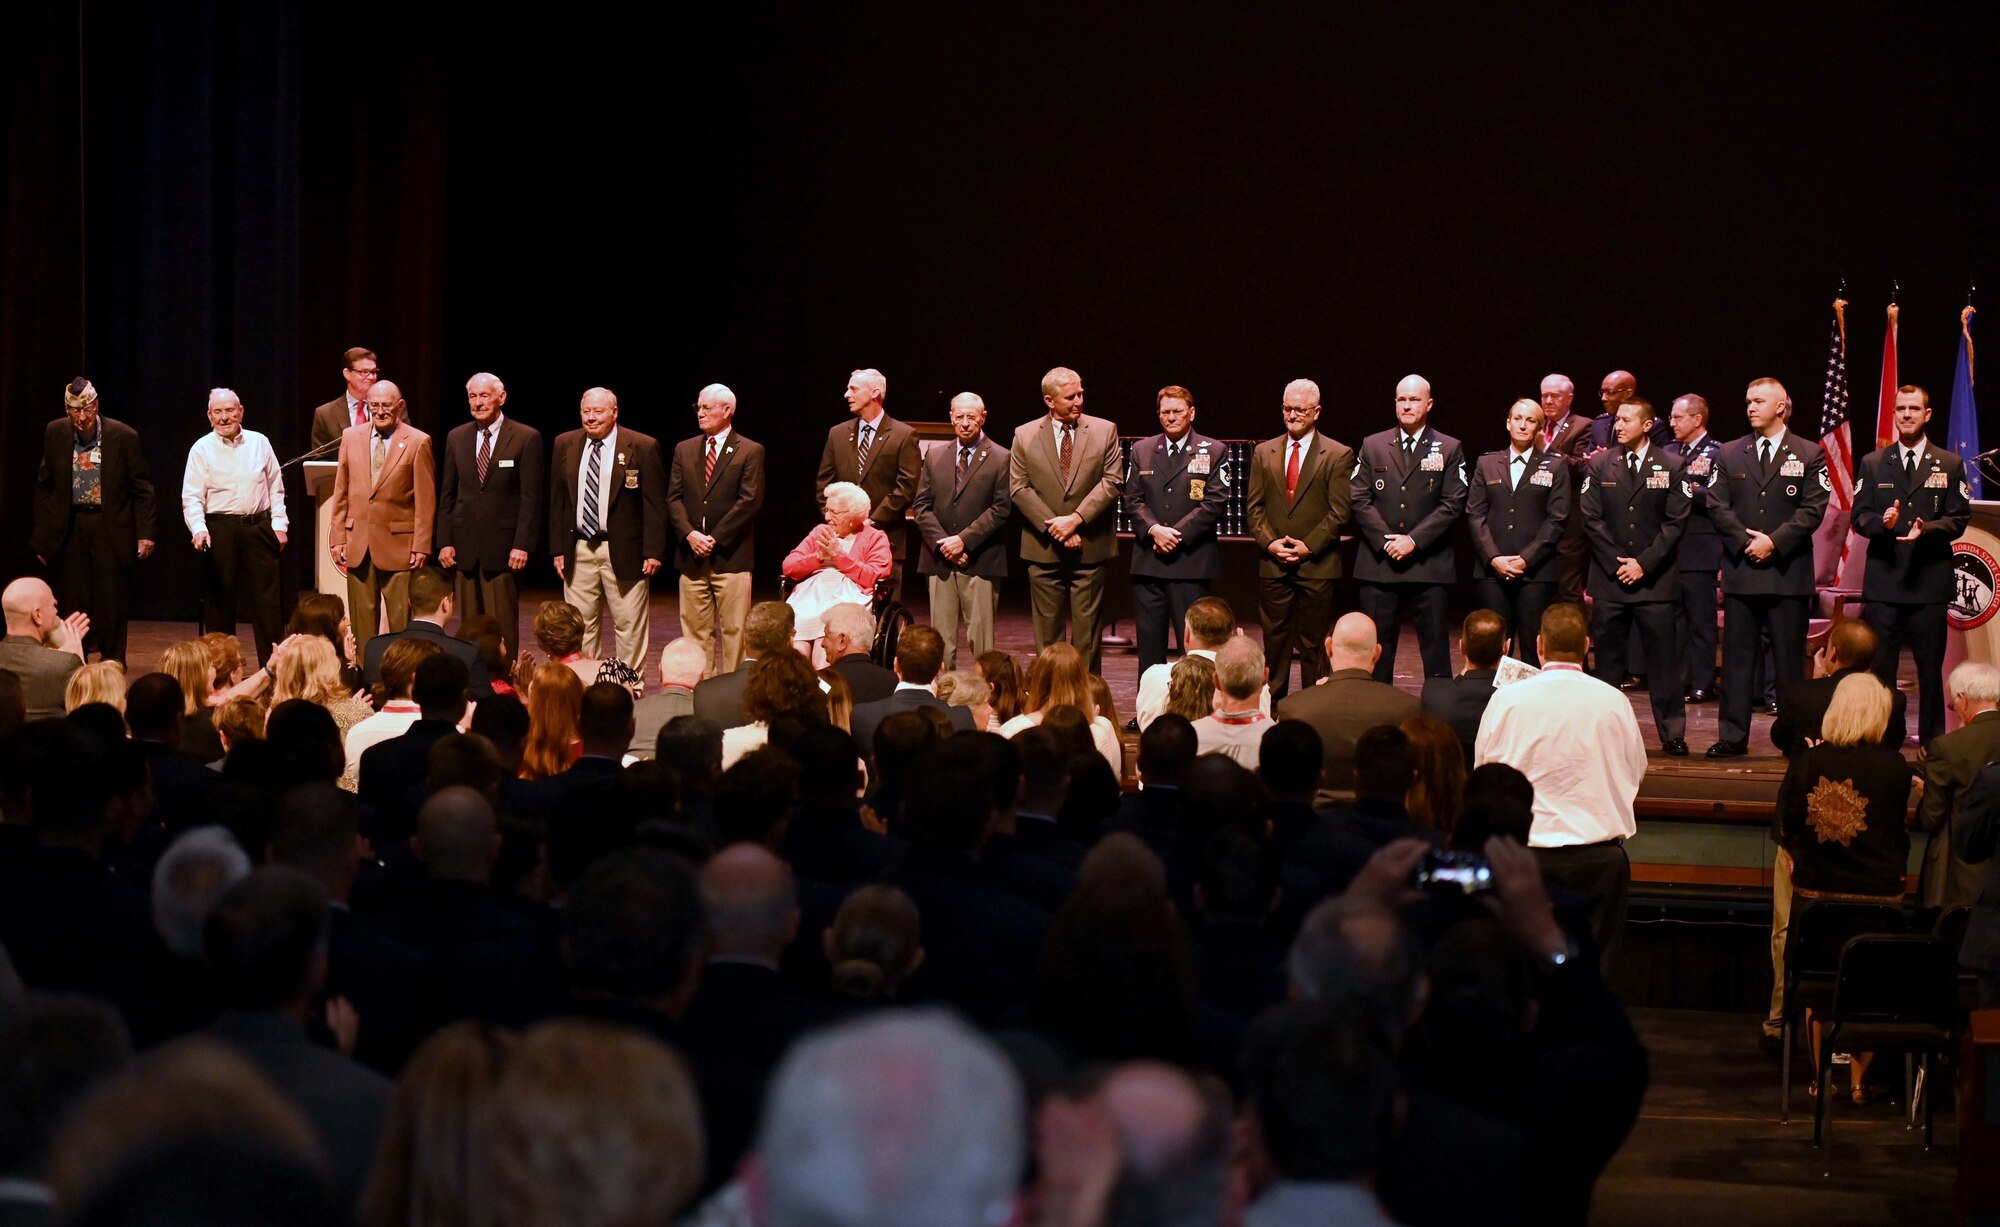 Sixteen local active-duty service members and veterans receive a standing ovation during the Doolittle Raider Goblet Ceremony at the Mattie Kelly Arts Center at Northwest Florida State College, Niceville, Florida, April 18, 2022. They were honored to represent the legacy of each of the 16 Doolittle crews and the contributions of an untold number of fellow Airmen to recognize the 75th Anniversary of the Air Force. (U.S. Air Force photo by Staff Sgt. Brandon Esau)